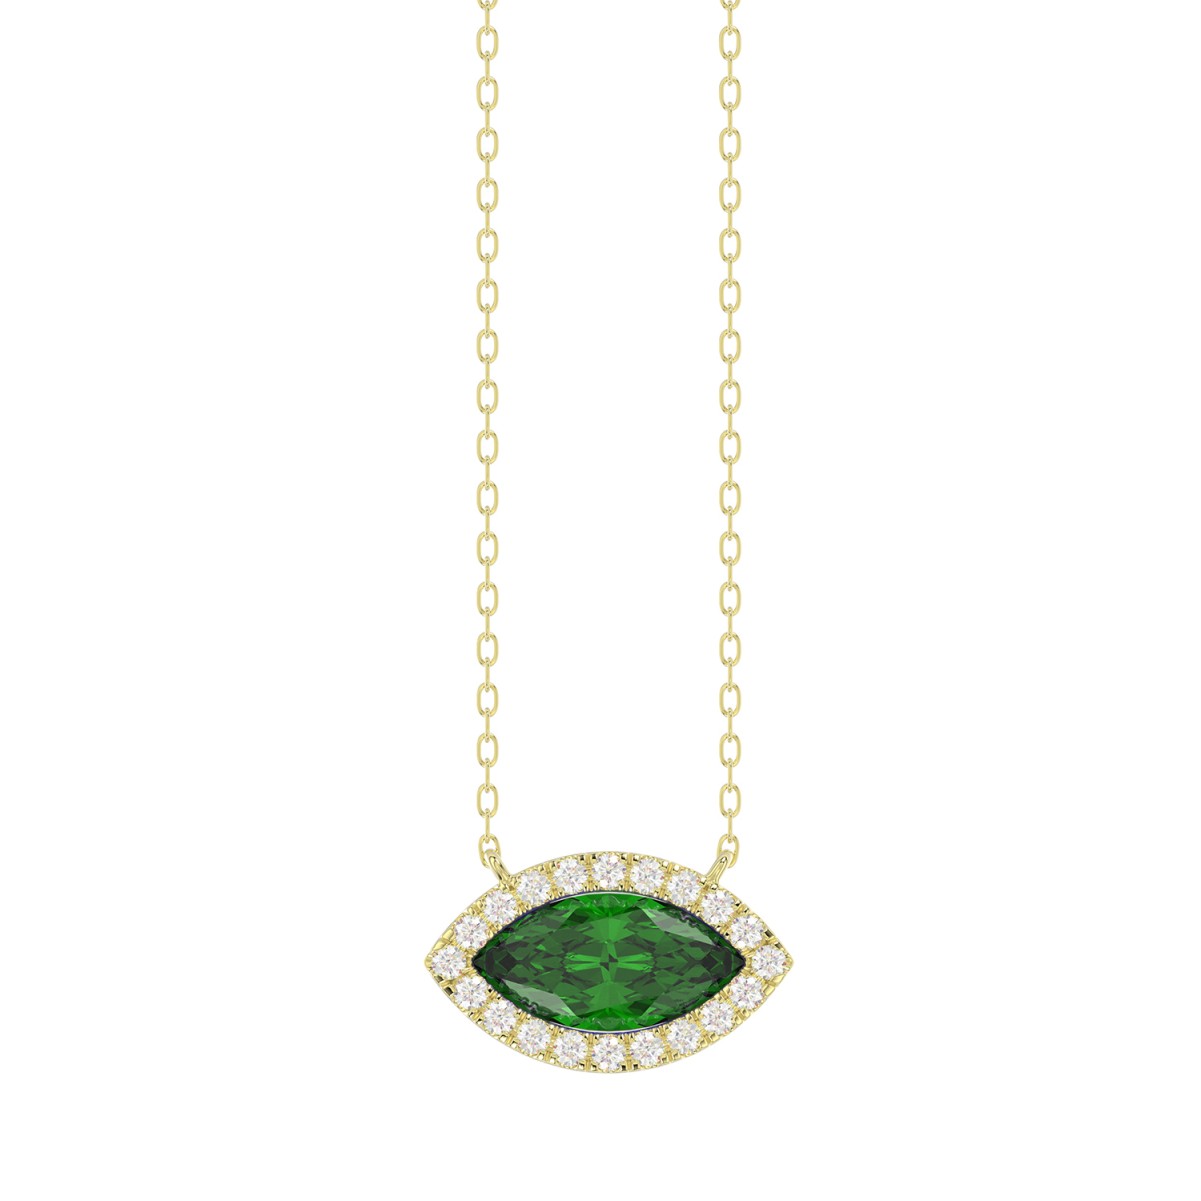 18K YELLOW GOLD 7/8CT ROUND/MARQUISE DIAMOND LADIES NECKLACE(COLOR STONE MARQUISE GREEN EMERALD DIAMOND 3/4CT)